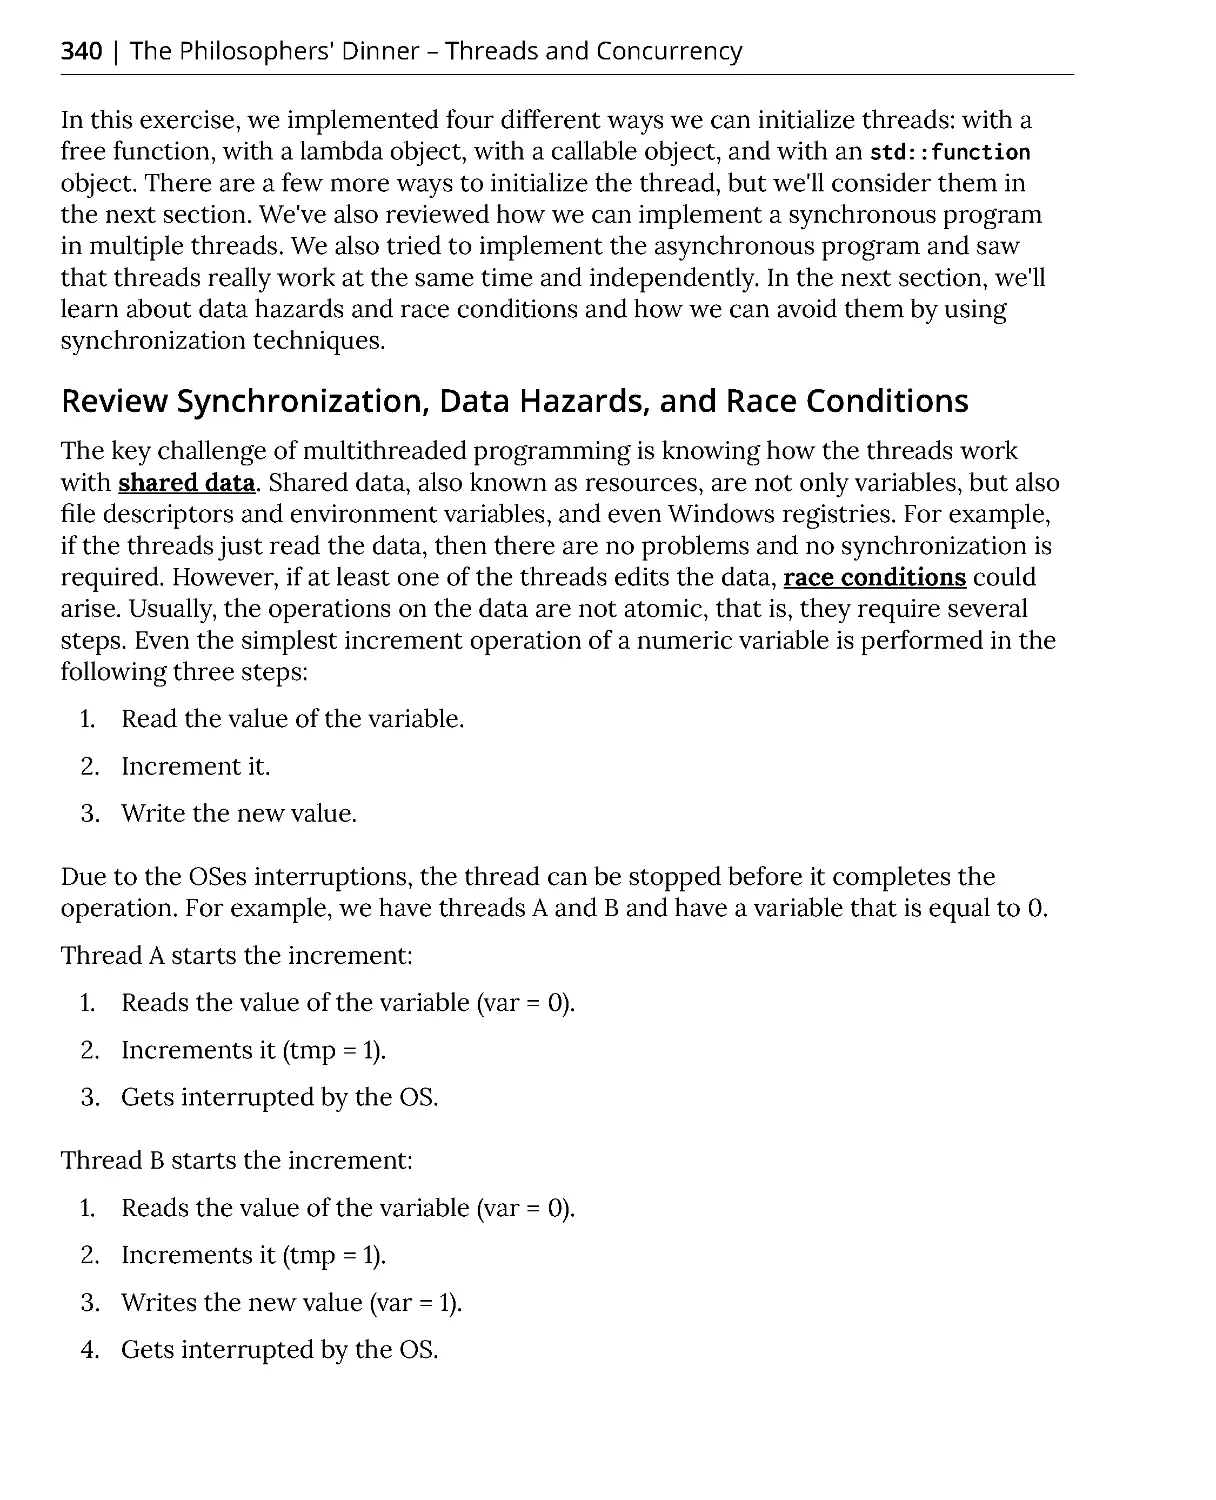 Review Synchronization, Data Hazards, and Race Conditions